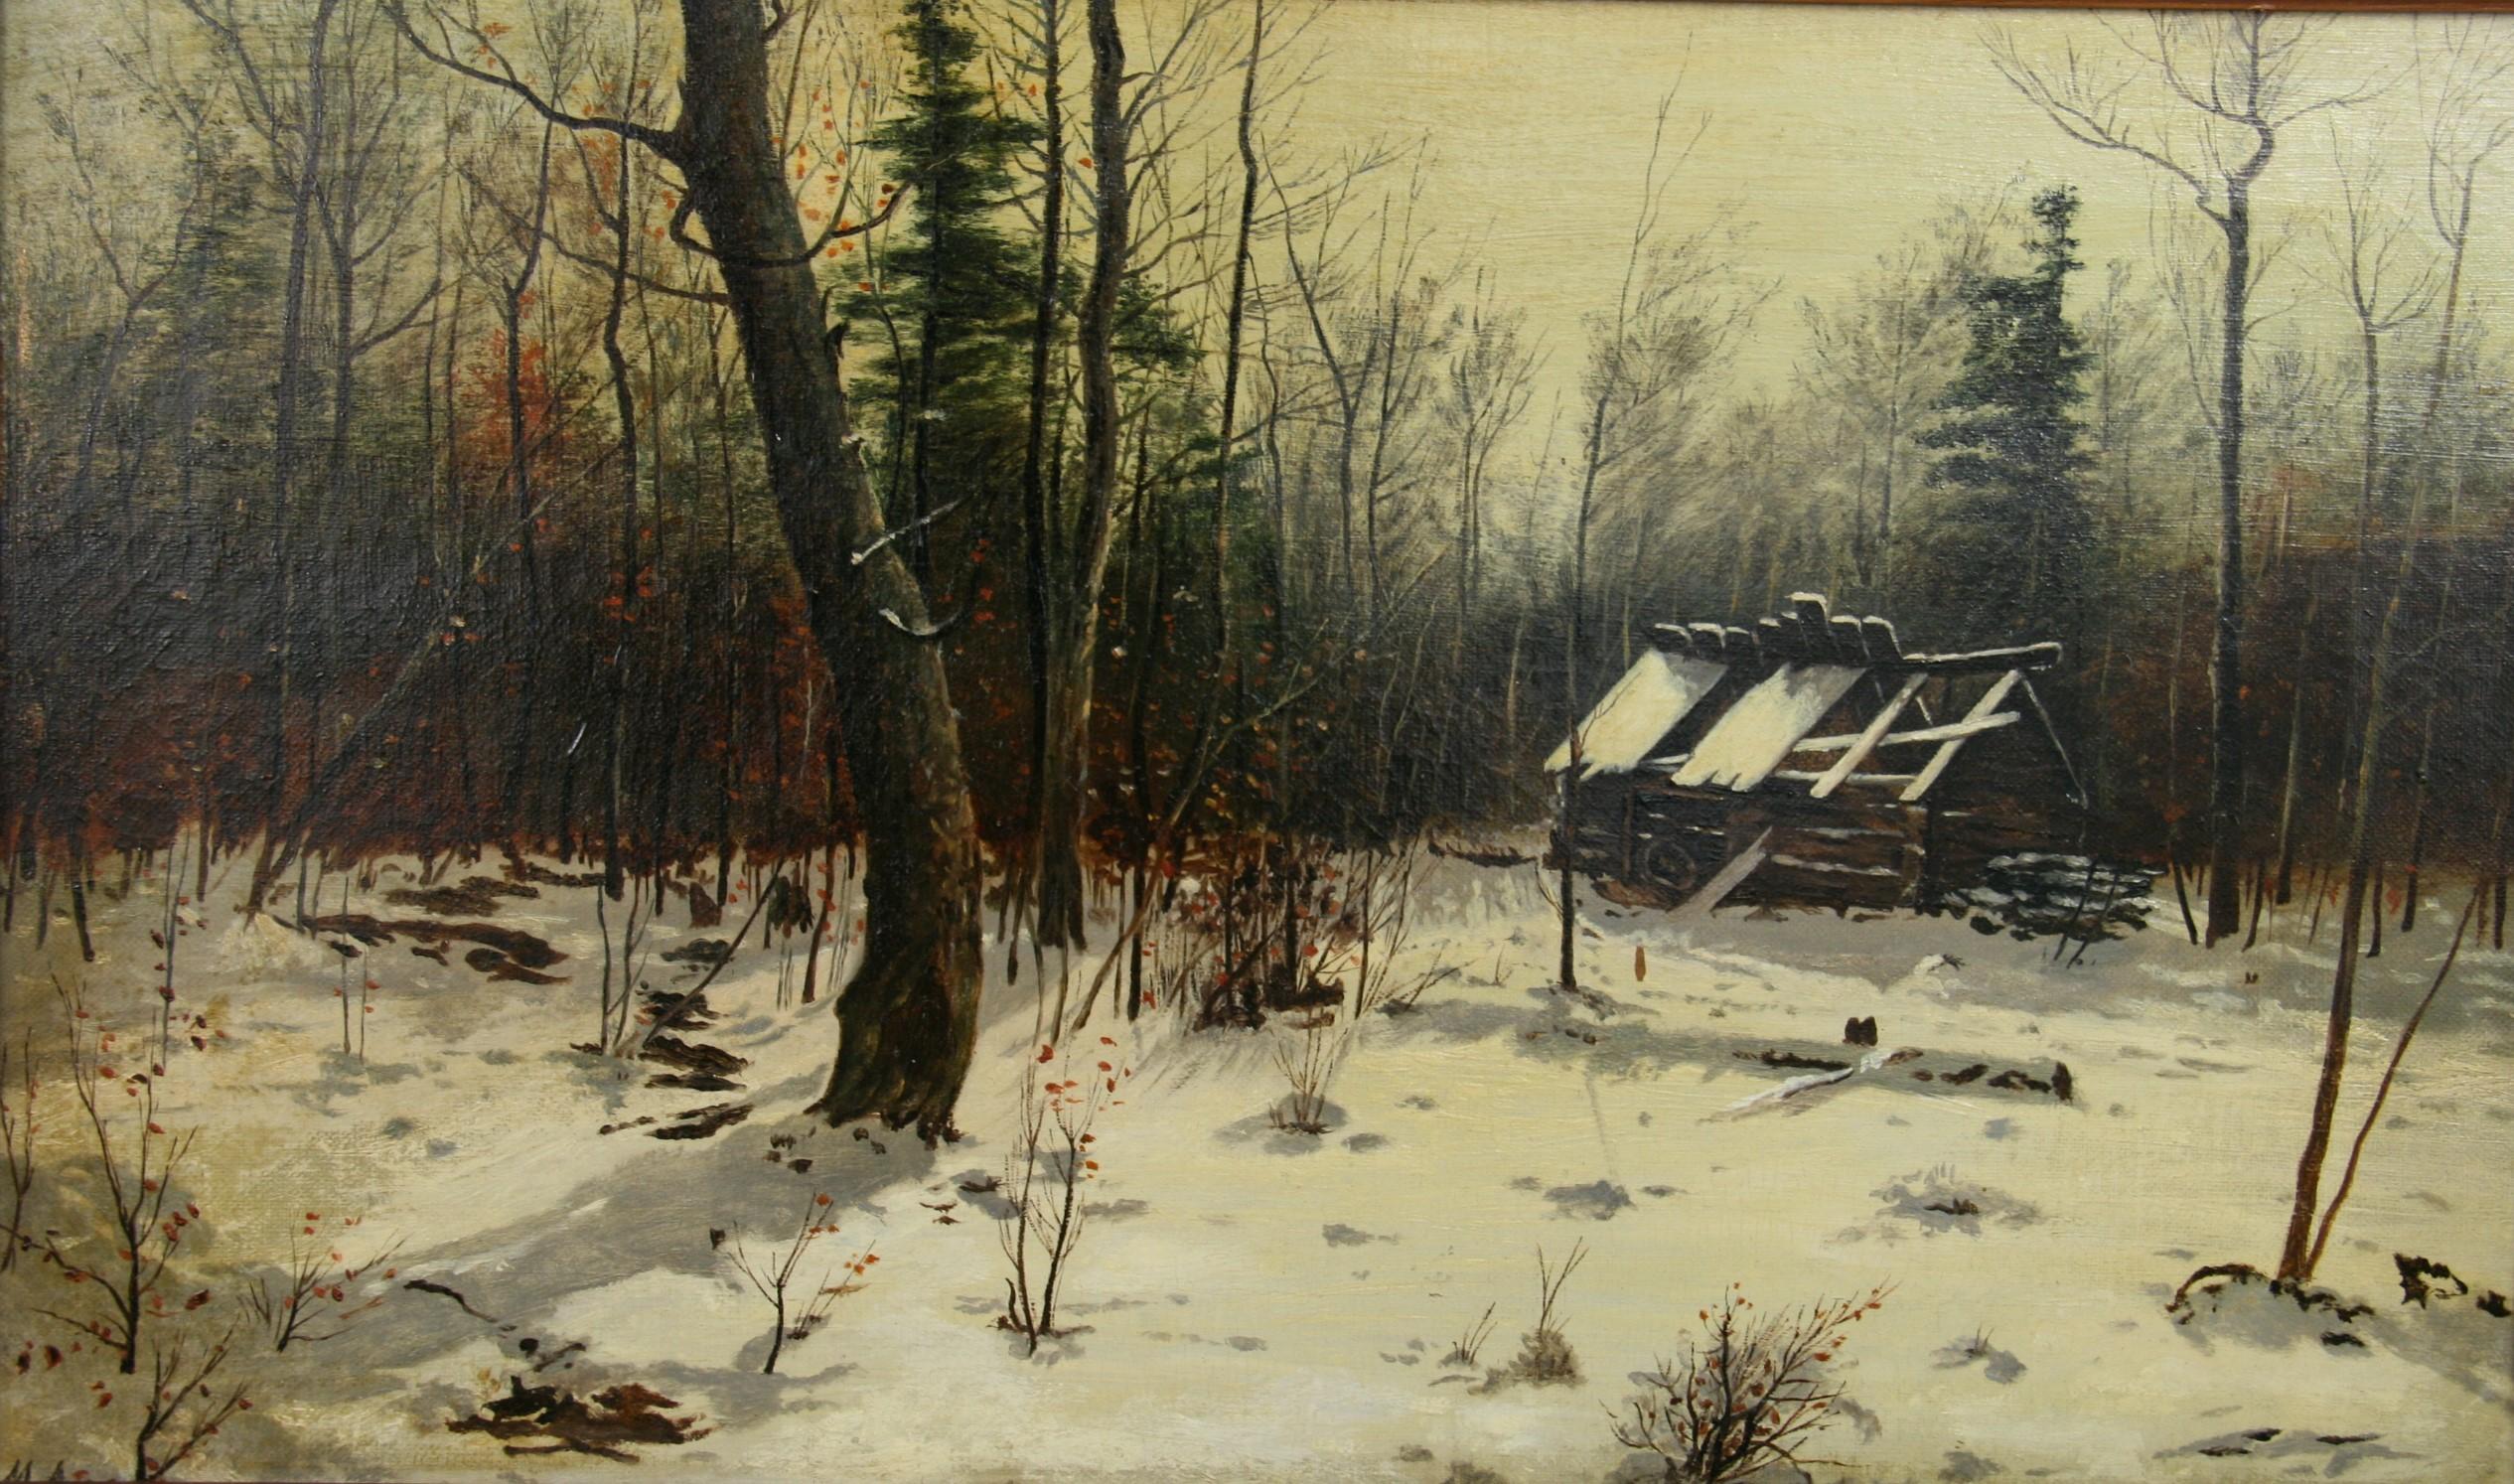 5-3744A.  Oil on canvas of a tranquil landscape with an abandoned cabin
Framed in a wood frame 
Image size 19.5x11.5